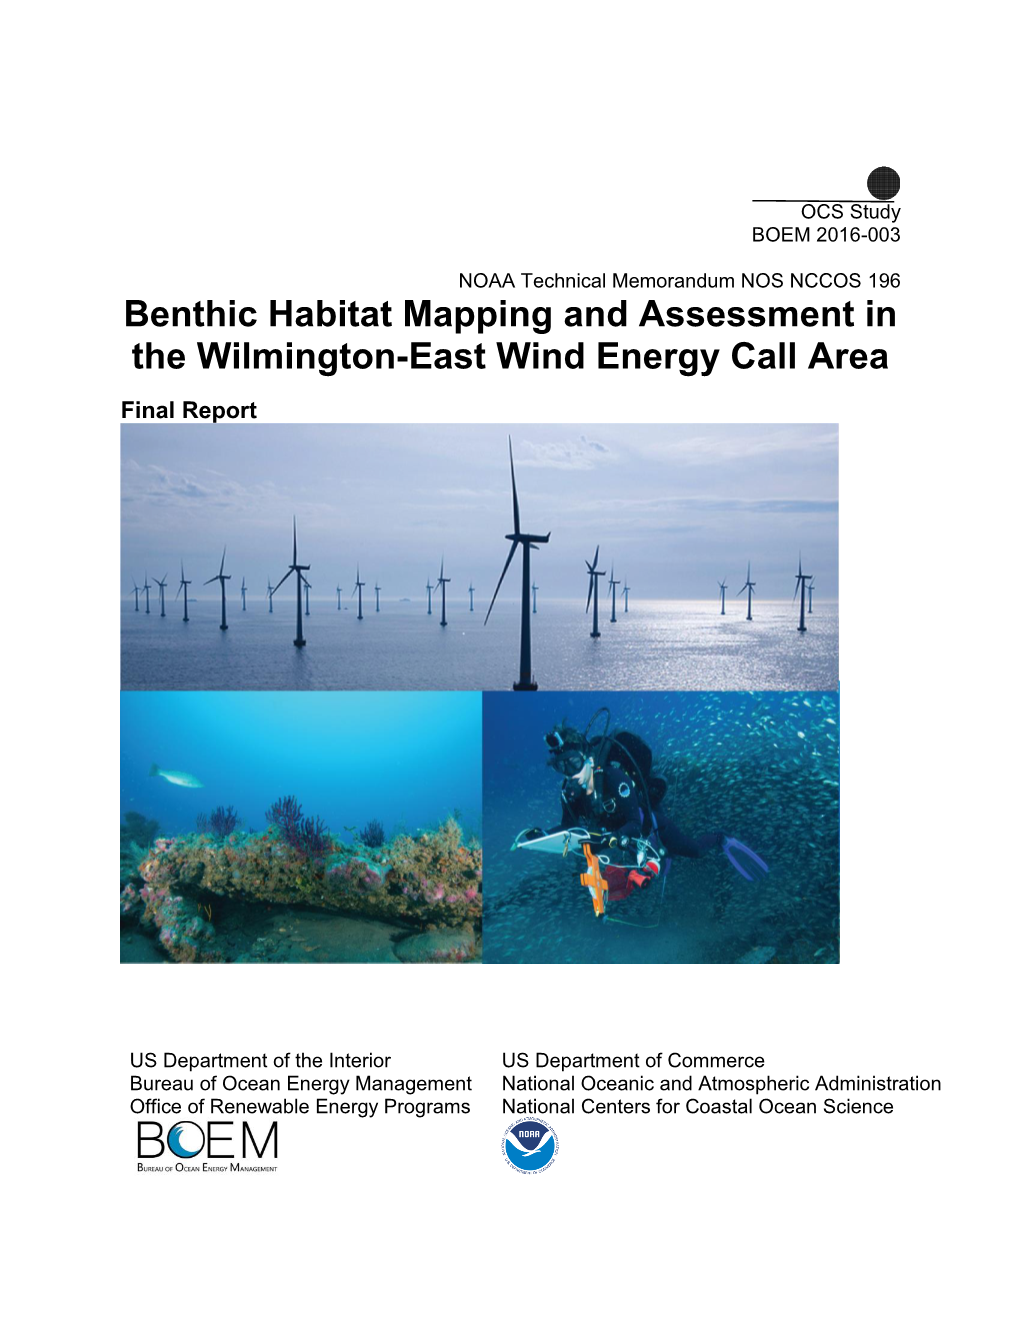 Benthic Habitat Mapping and Assessment in the Wilmington-East Wind Energy Call Area